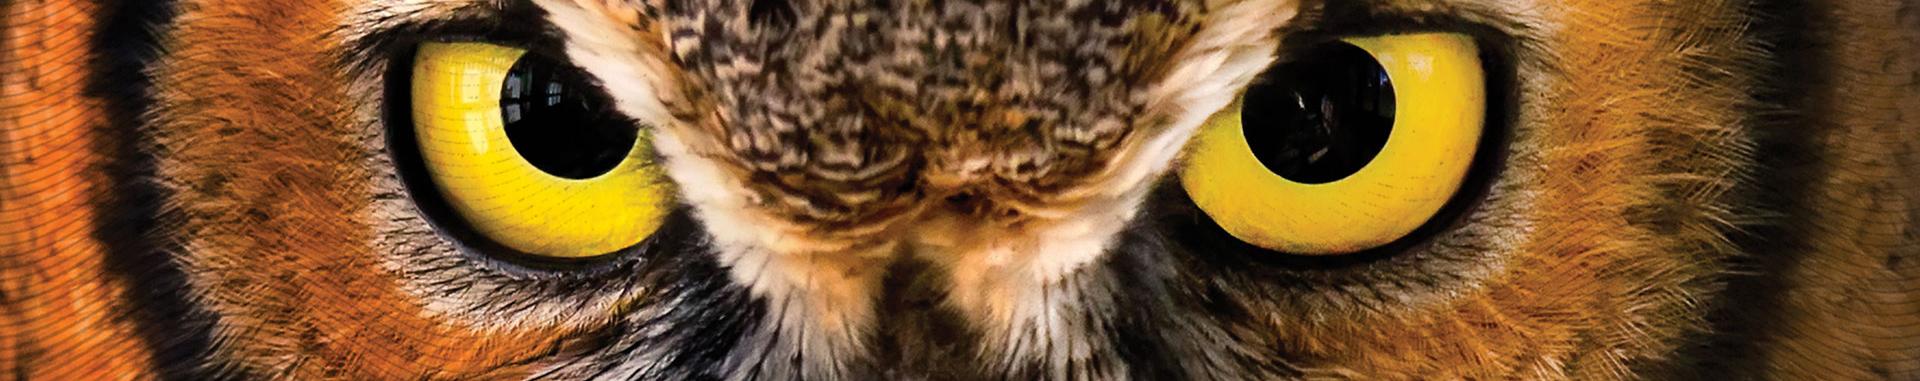 Panoramic color closeup image of an owl's yellow eyes. A horizontal slice of another International Owl Center photo.